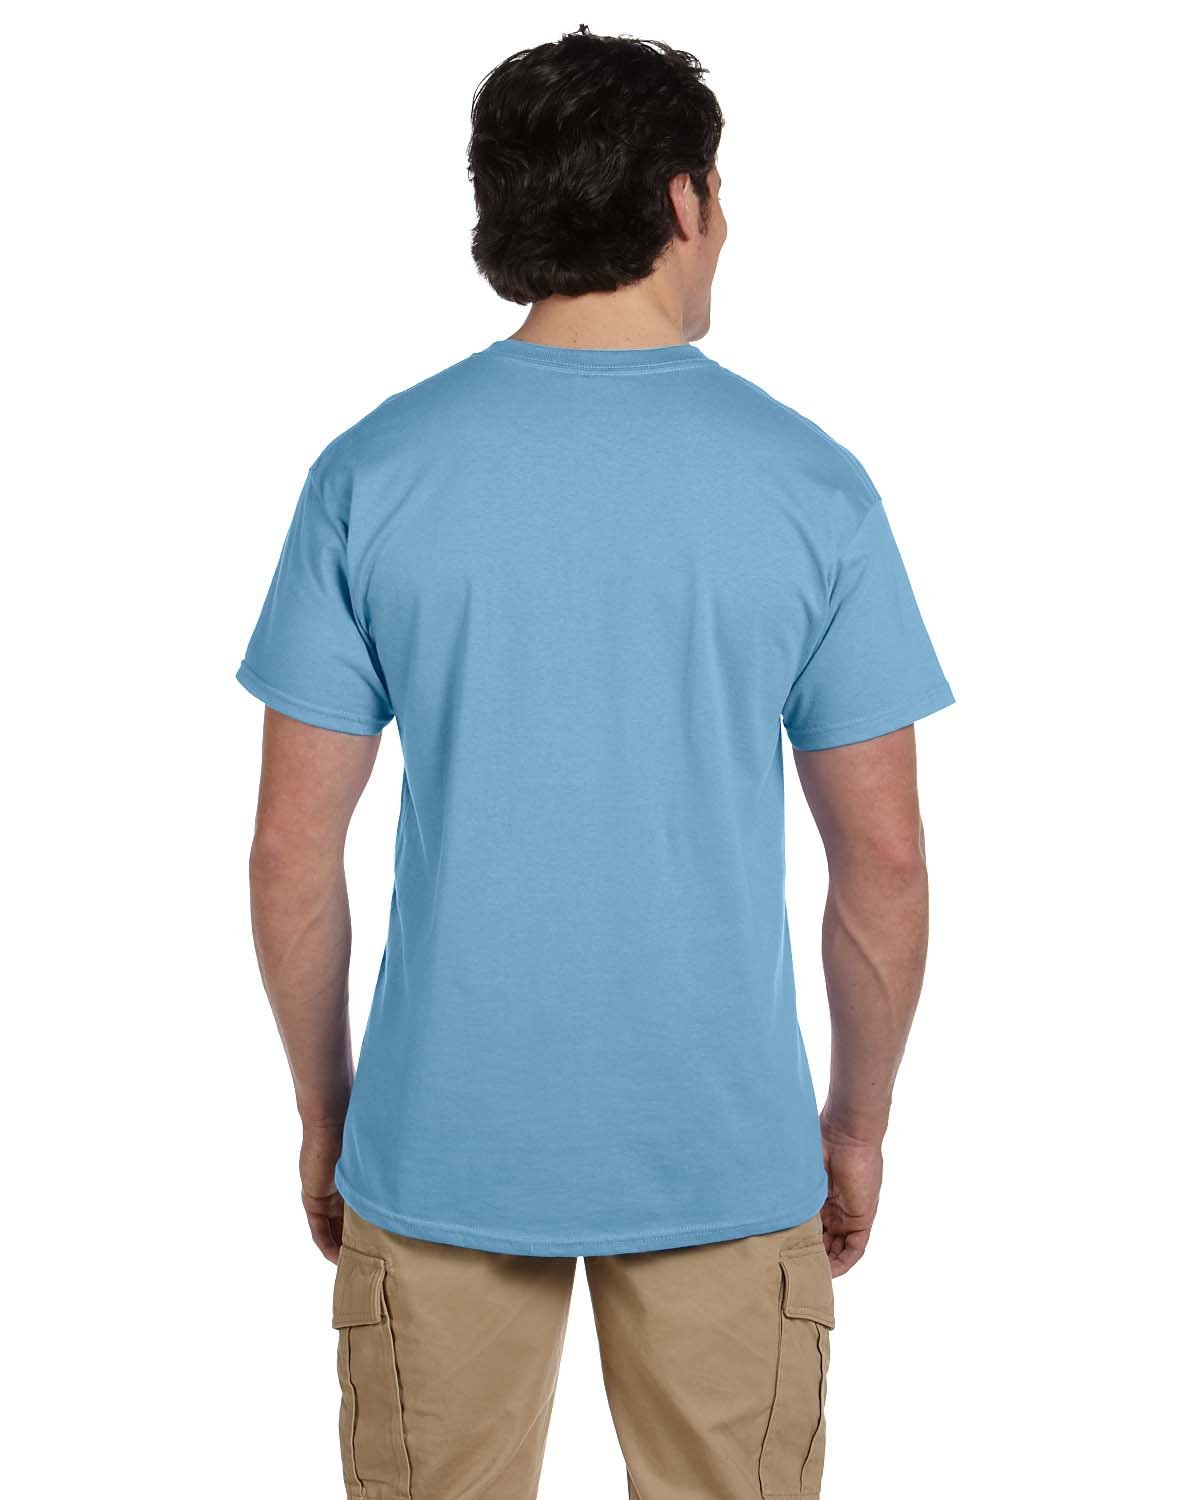 Adult HD Cotton™ T-Shirt - image 2 of 3